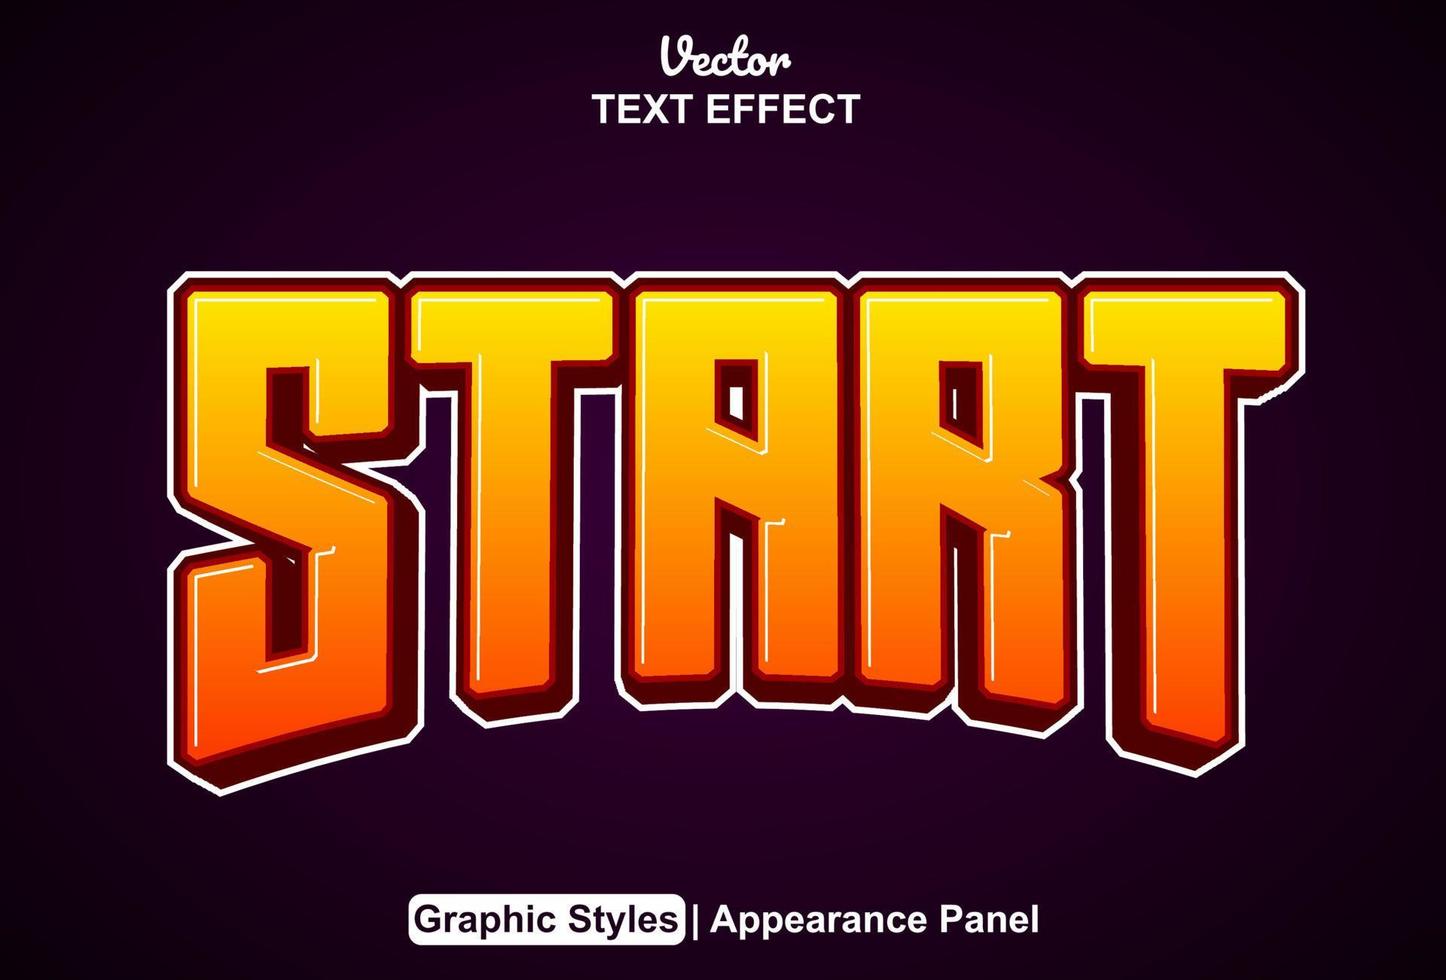 start text effect with graphic style and editable. vector